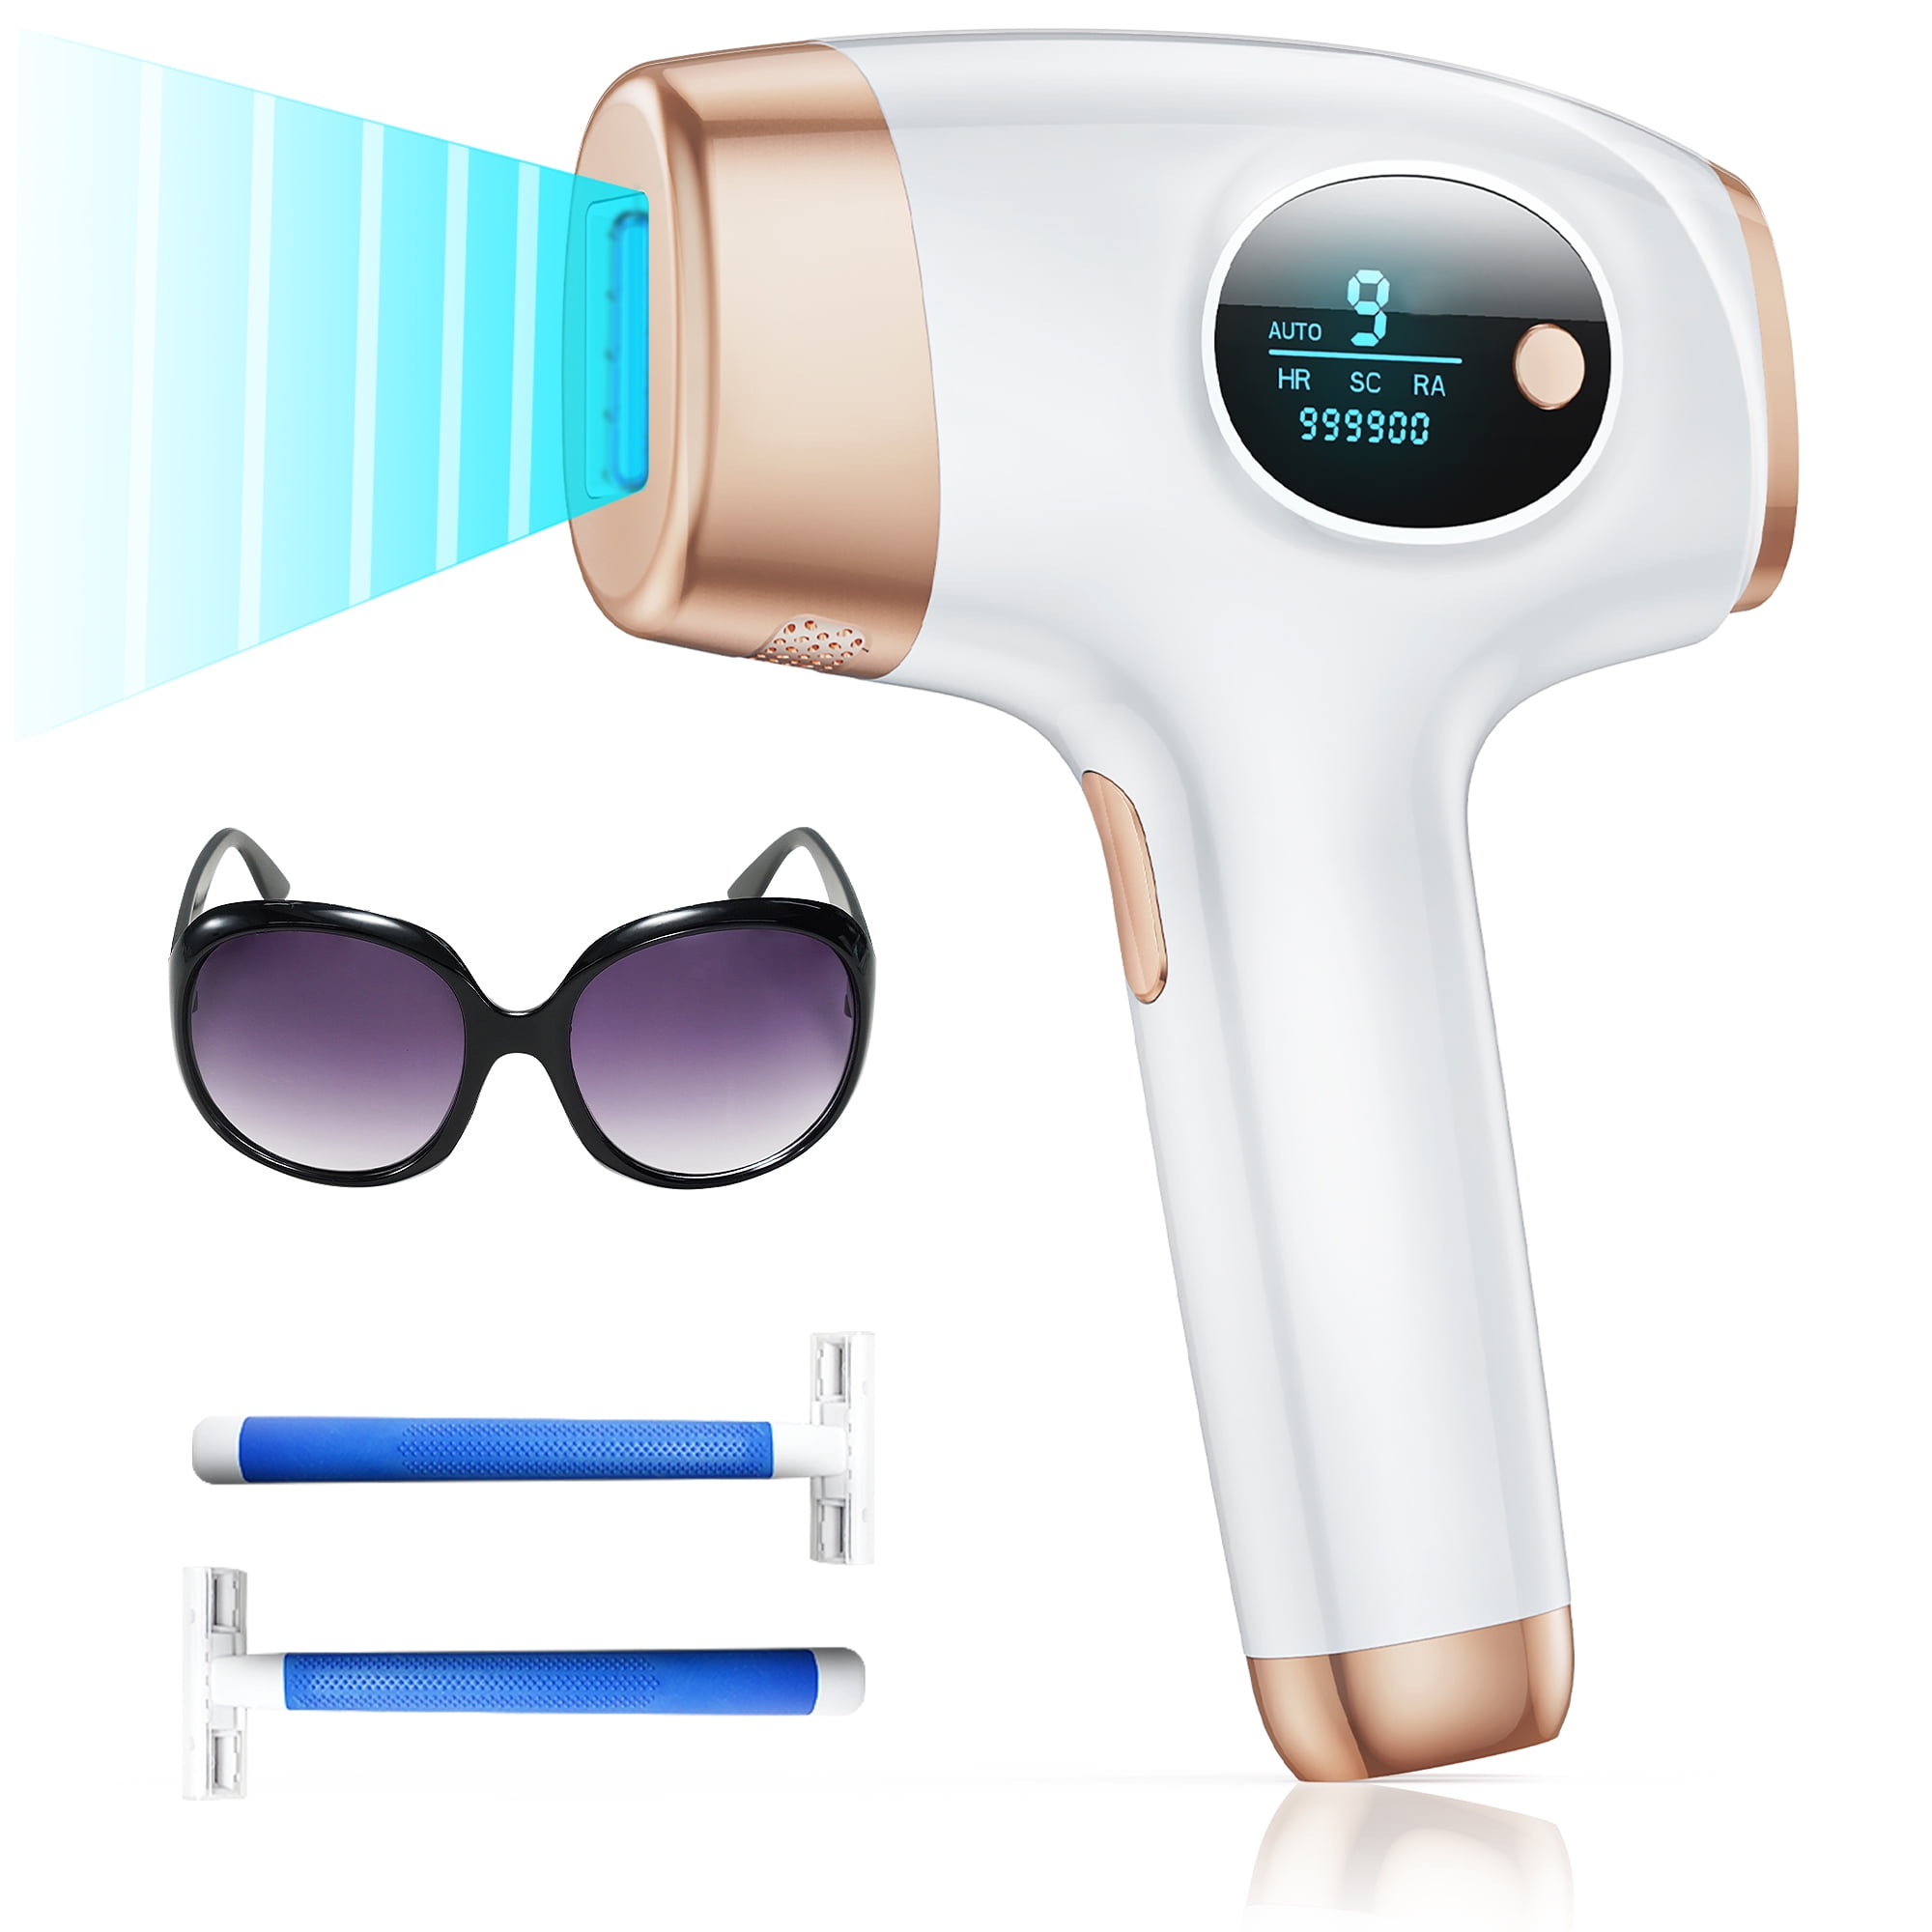 JOOYEE IPL Laser Permanent Hair Removal Upgraded to 999,900